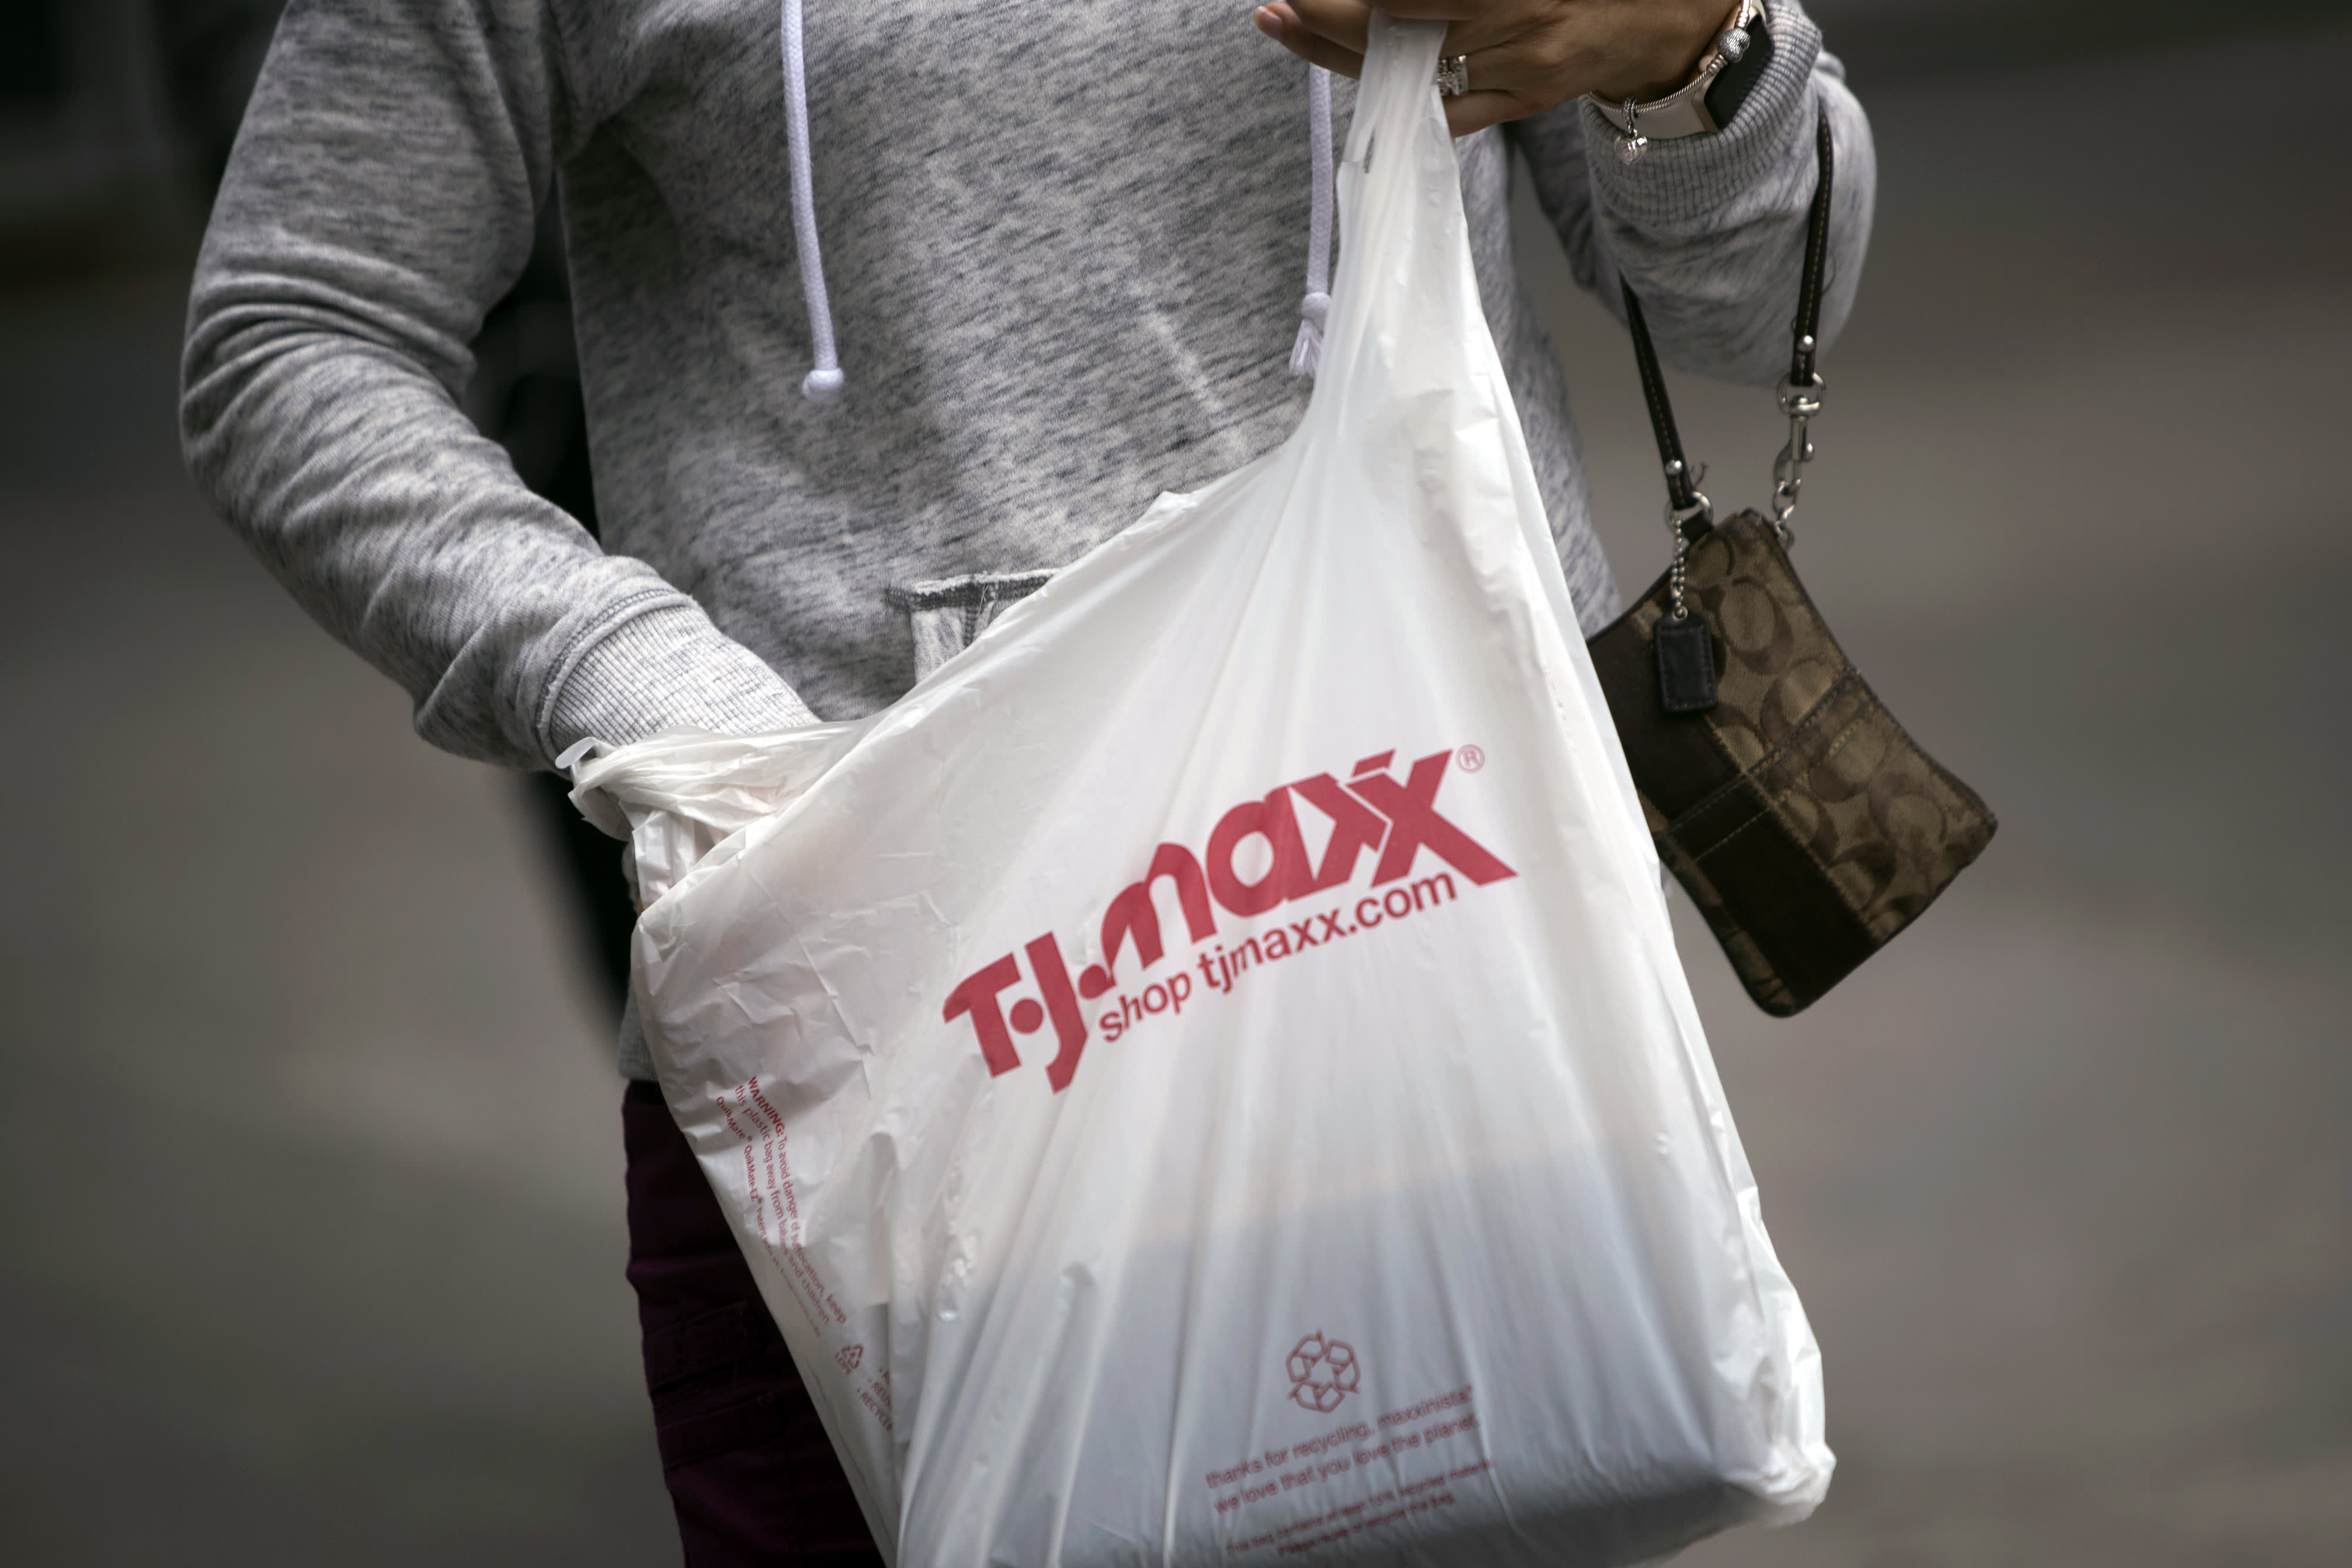 As consumer spending slows, Club holding TJX is the off-price retailer to own